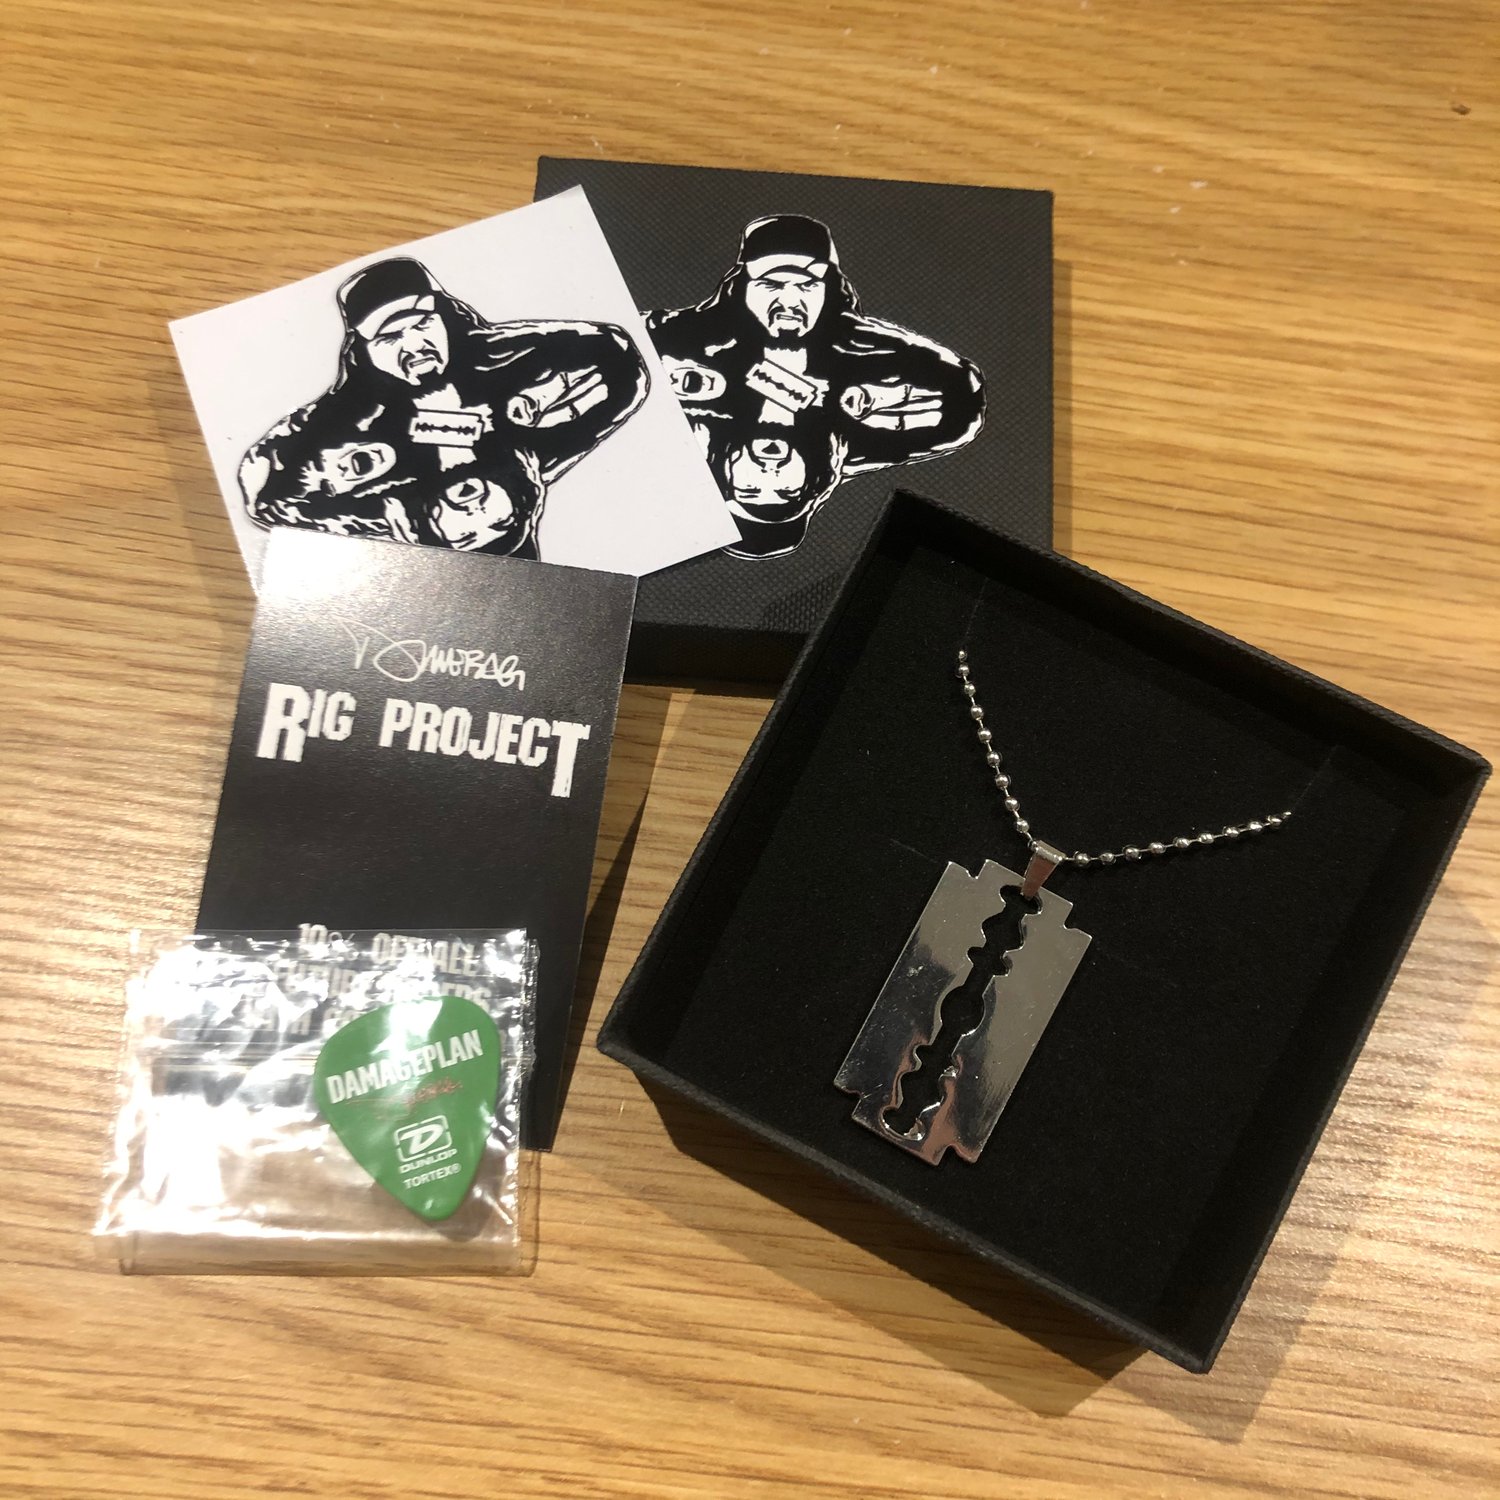 Razorblade necklace and pick pack